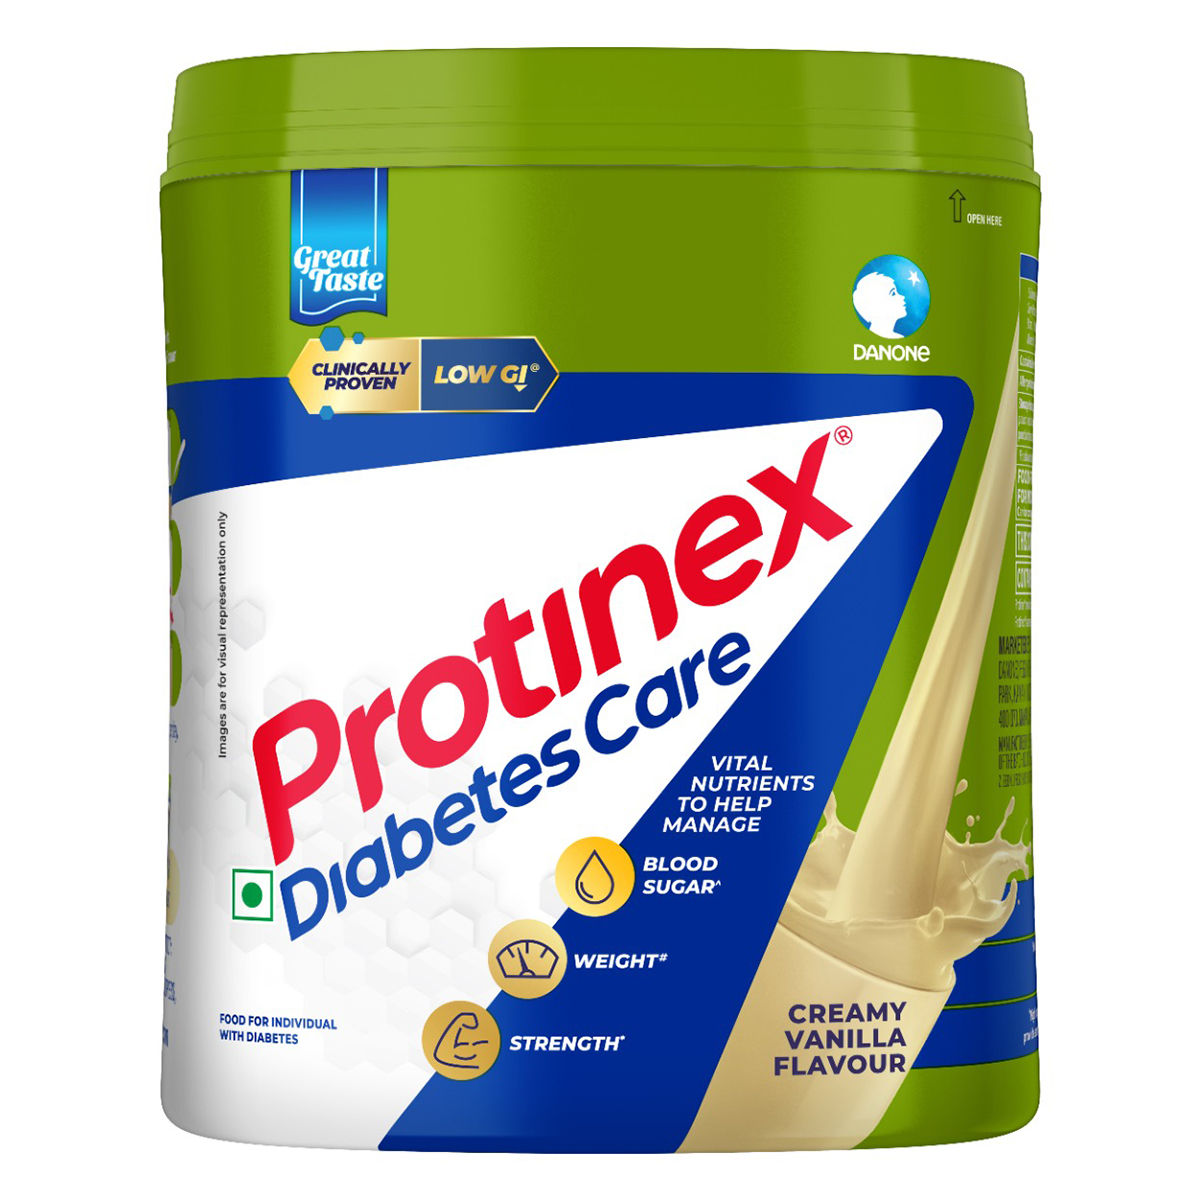 Buy Protinex Diabetes Care Creamy Vanilla Flavour Nutritional Drink Powder for Indian Adults to Control Blood Sugar, 400 gm  Online